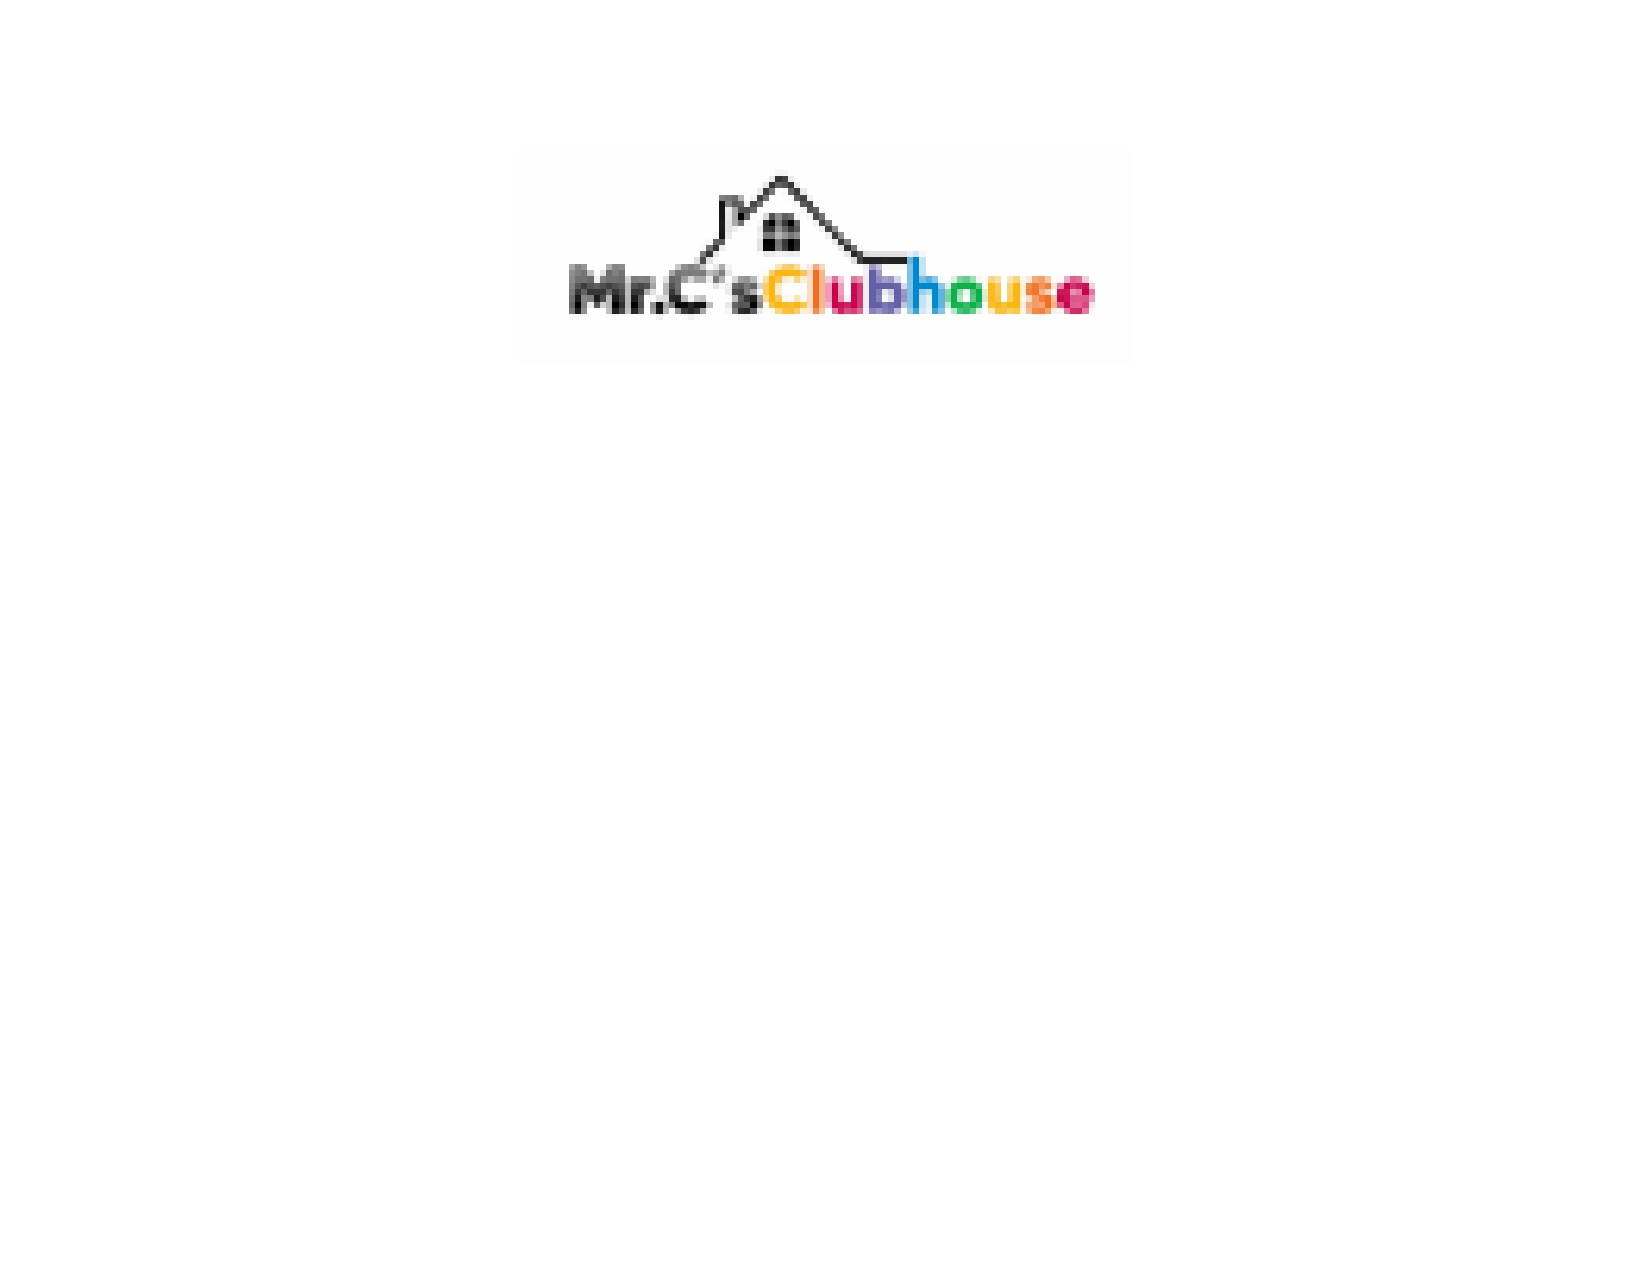 Mr. C's Clubhouse logo